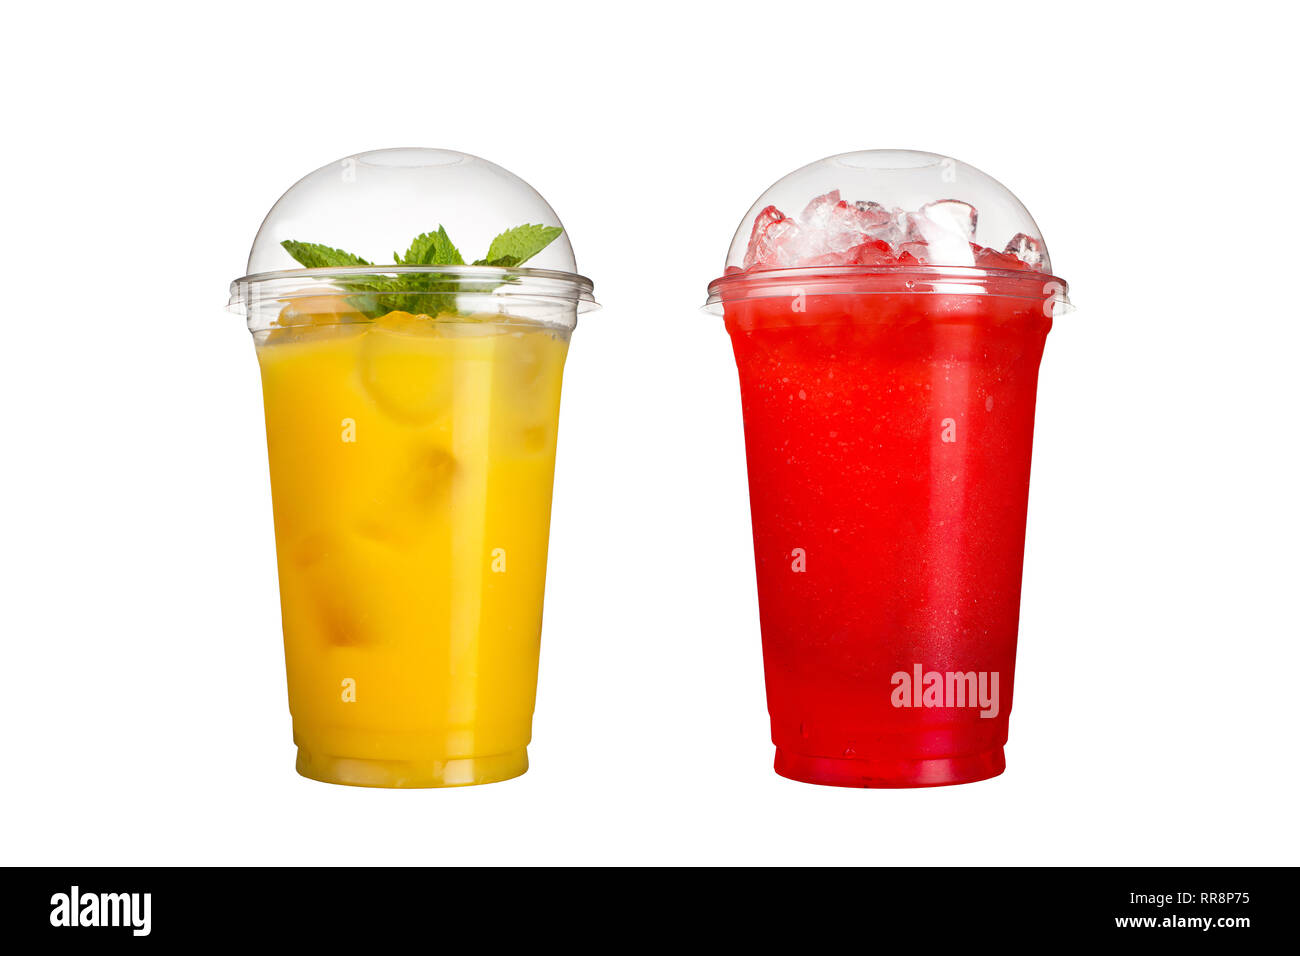 https://c8.alamy.com/comp/RR8P75/delicious-fruit-smoothies-in-plastic-cups-on-a-white-background-two-cocktails-isolated-RR8P75.jpg